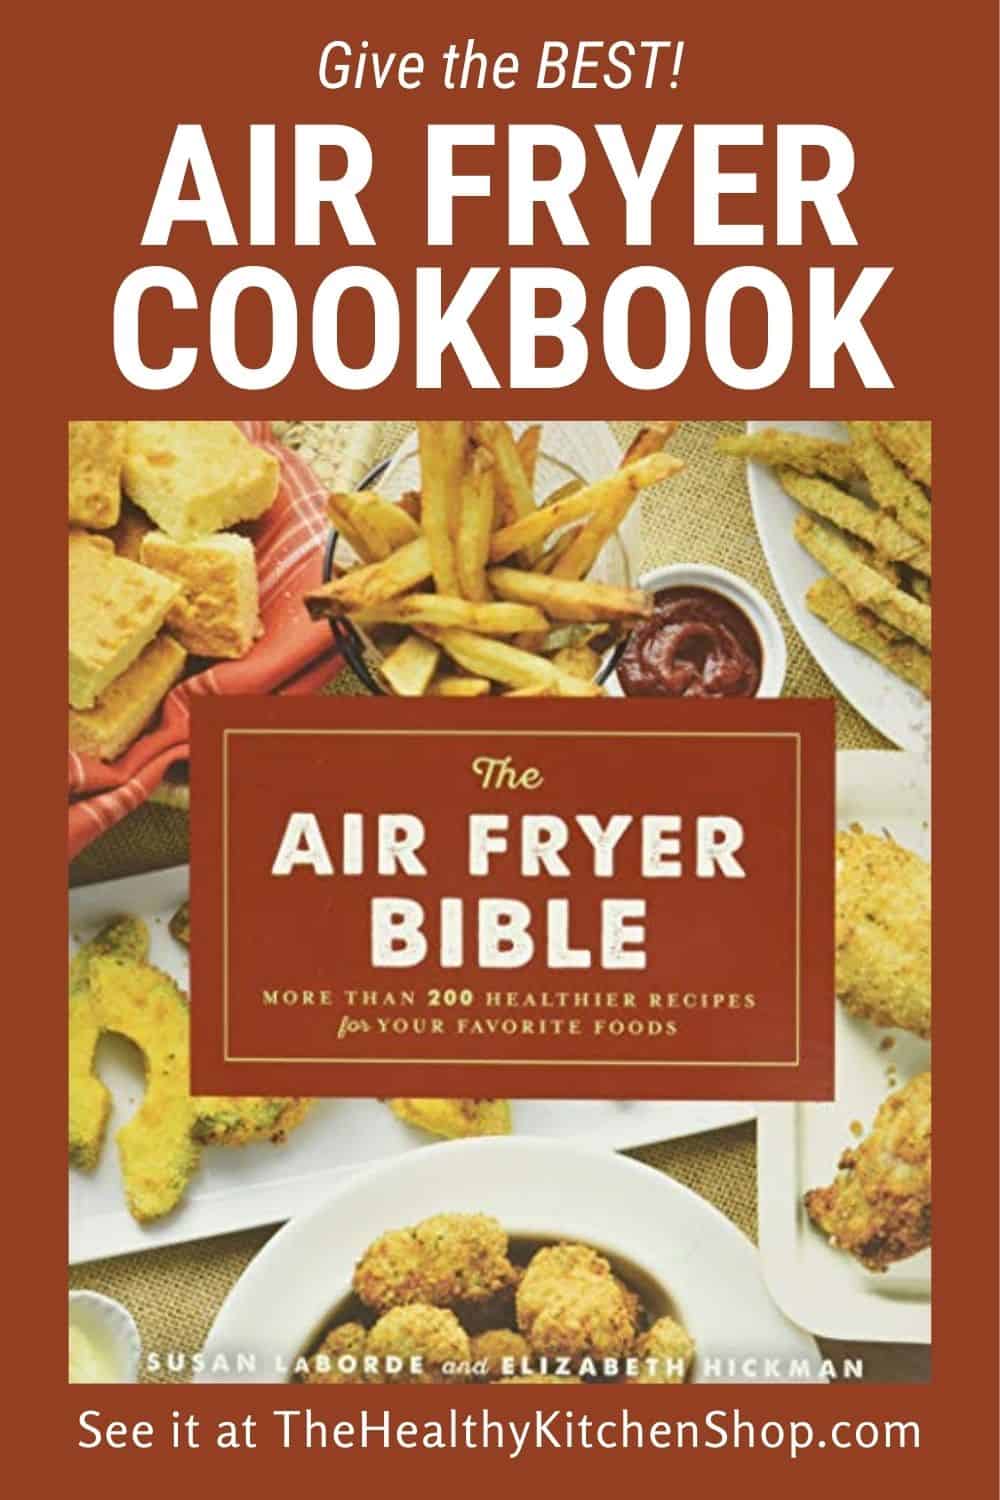 Give the BEST! The Air Fryer Bible Cookbook